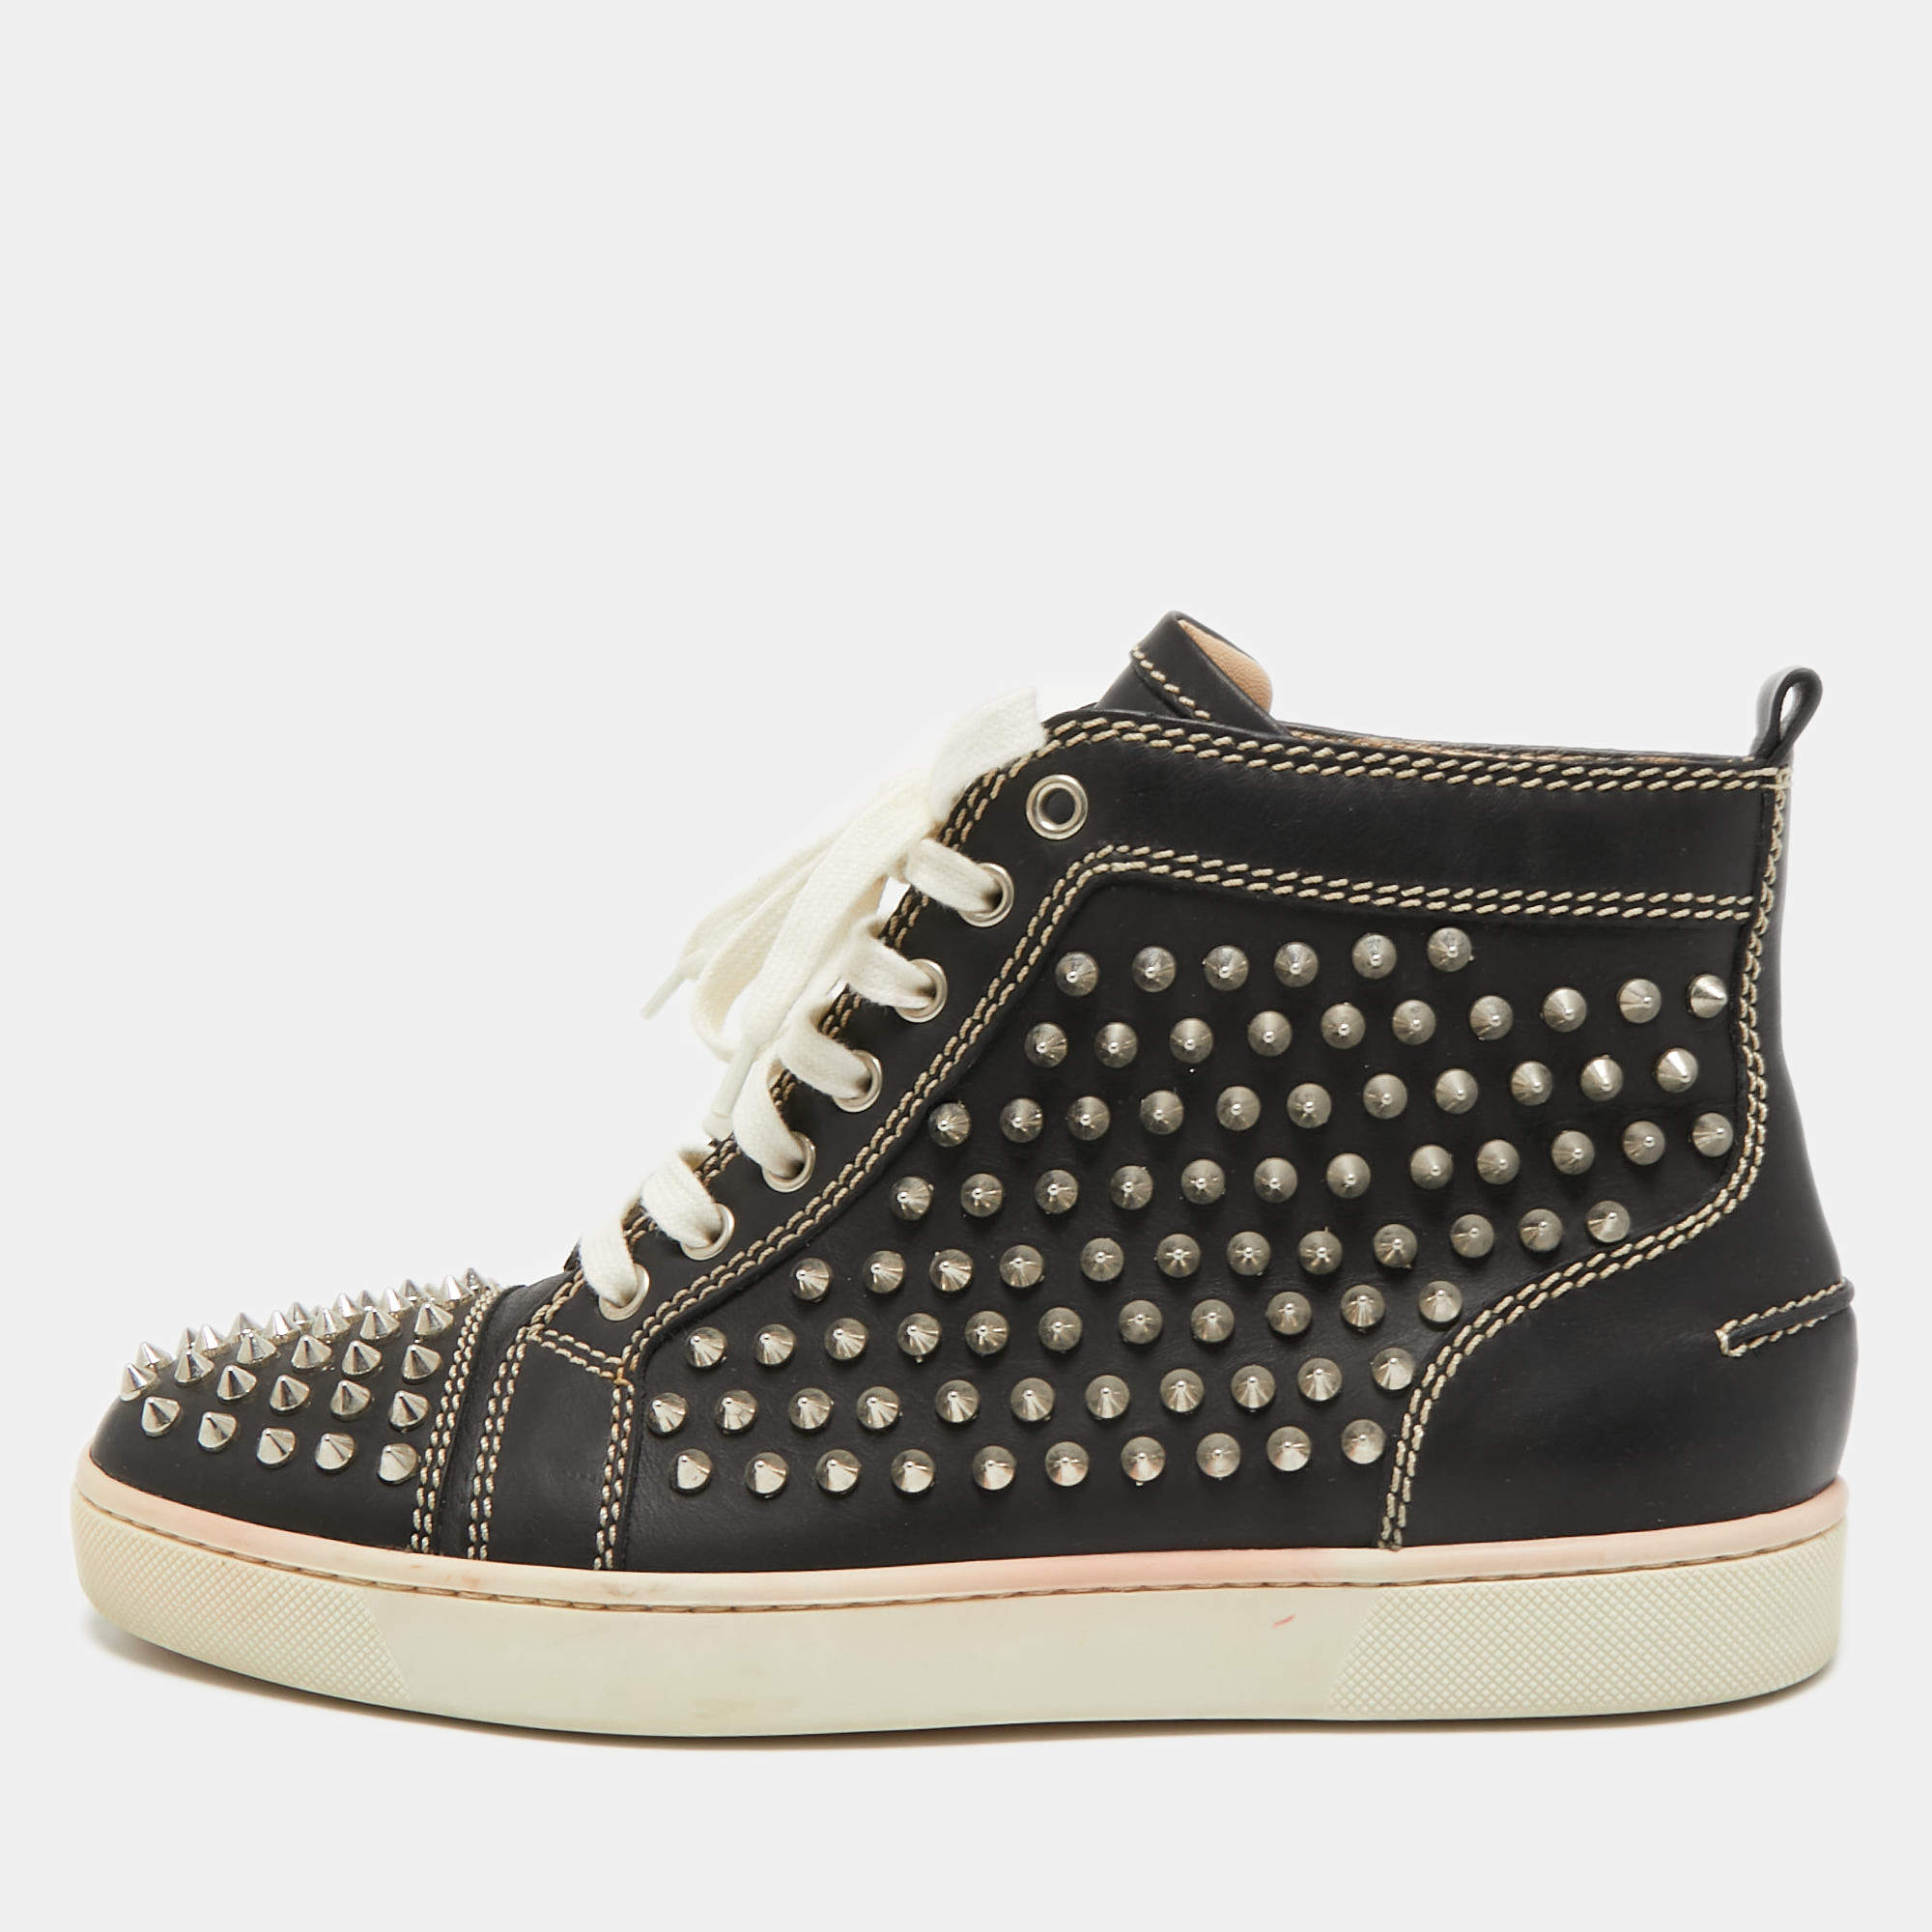 Louis Spikes - Sneakers - Calf leather and spikes - Black - Christian  Louboutin Canada